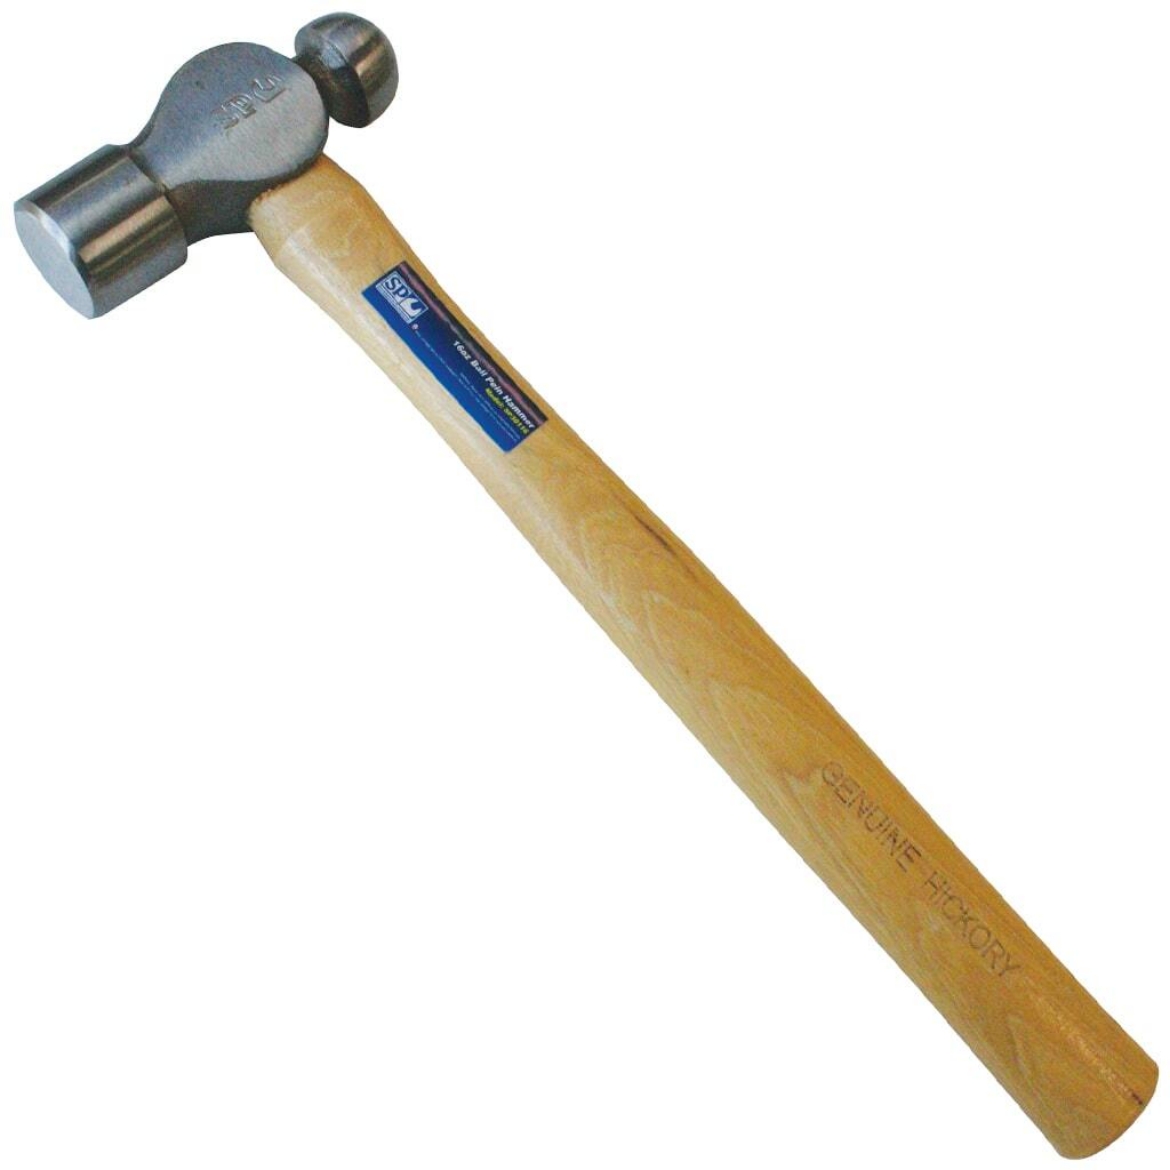 Picture of Ball Pein Hammer 0.5lb(8oz)/227g